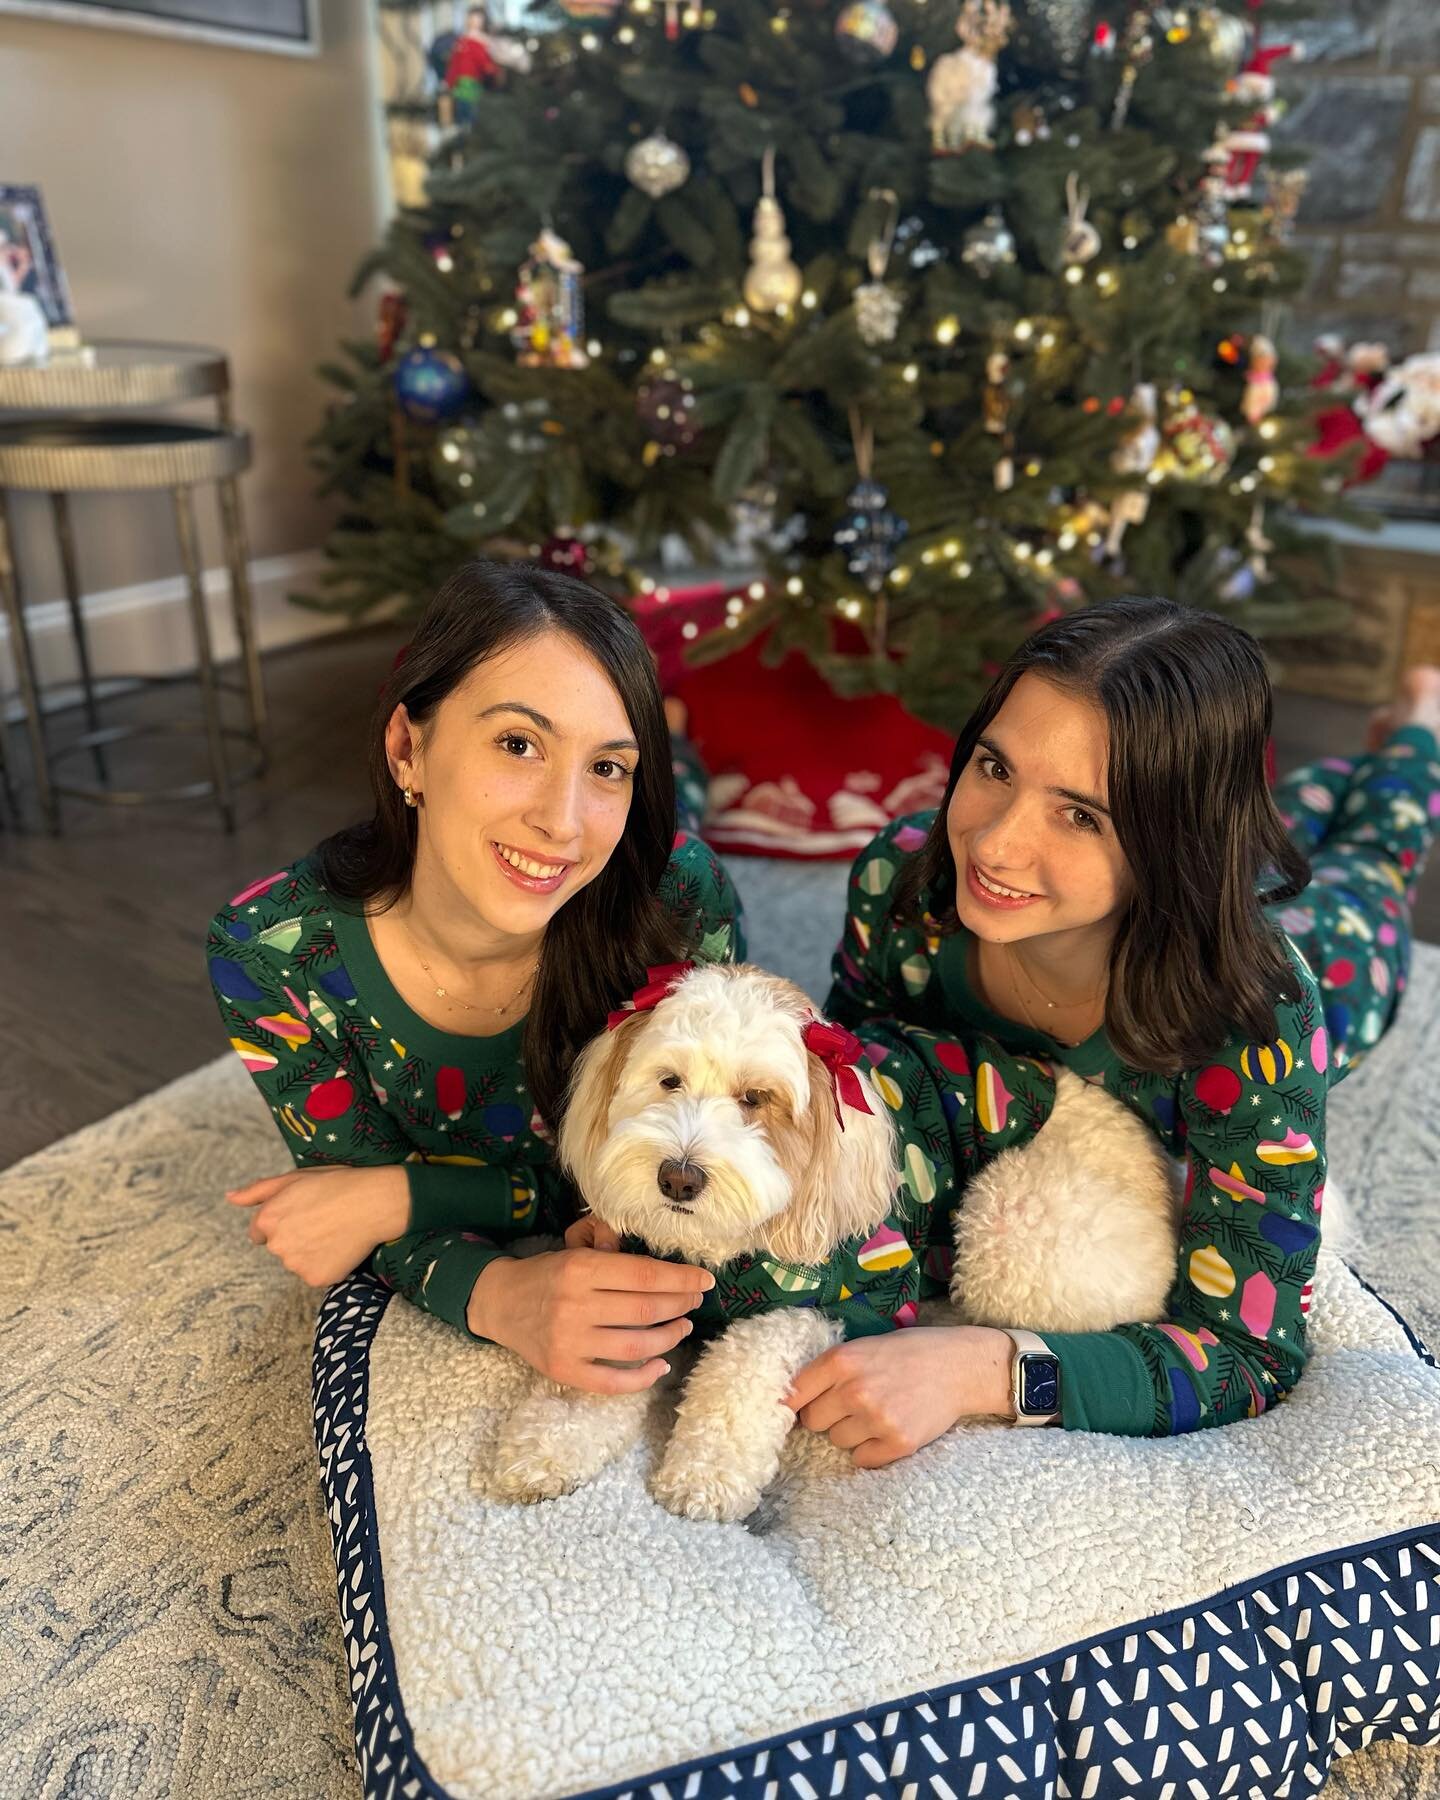 Hope everyone had a great matching pajamas day! &hellip;Oh and a very Merry Christmas too